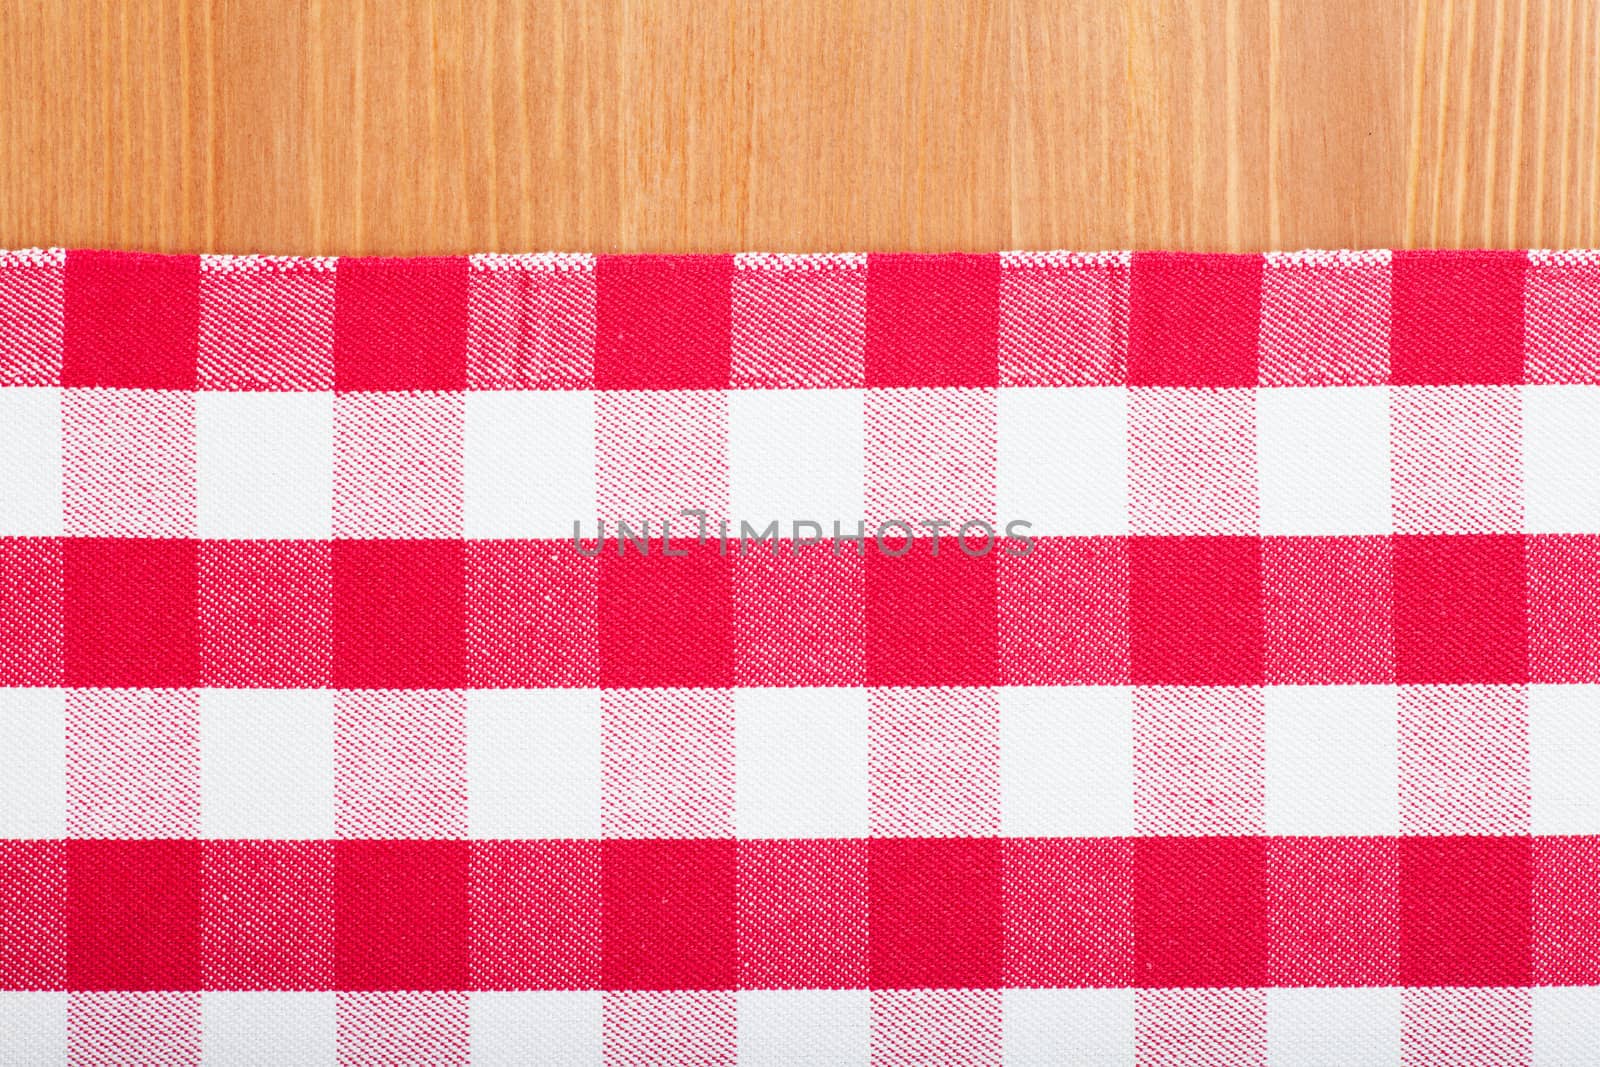 Checked with red and white tablecloth on a wooden table